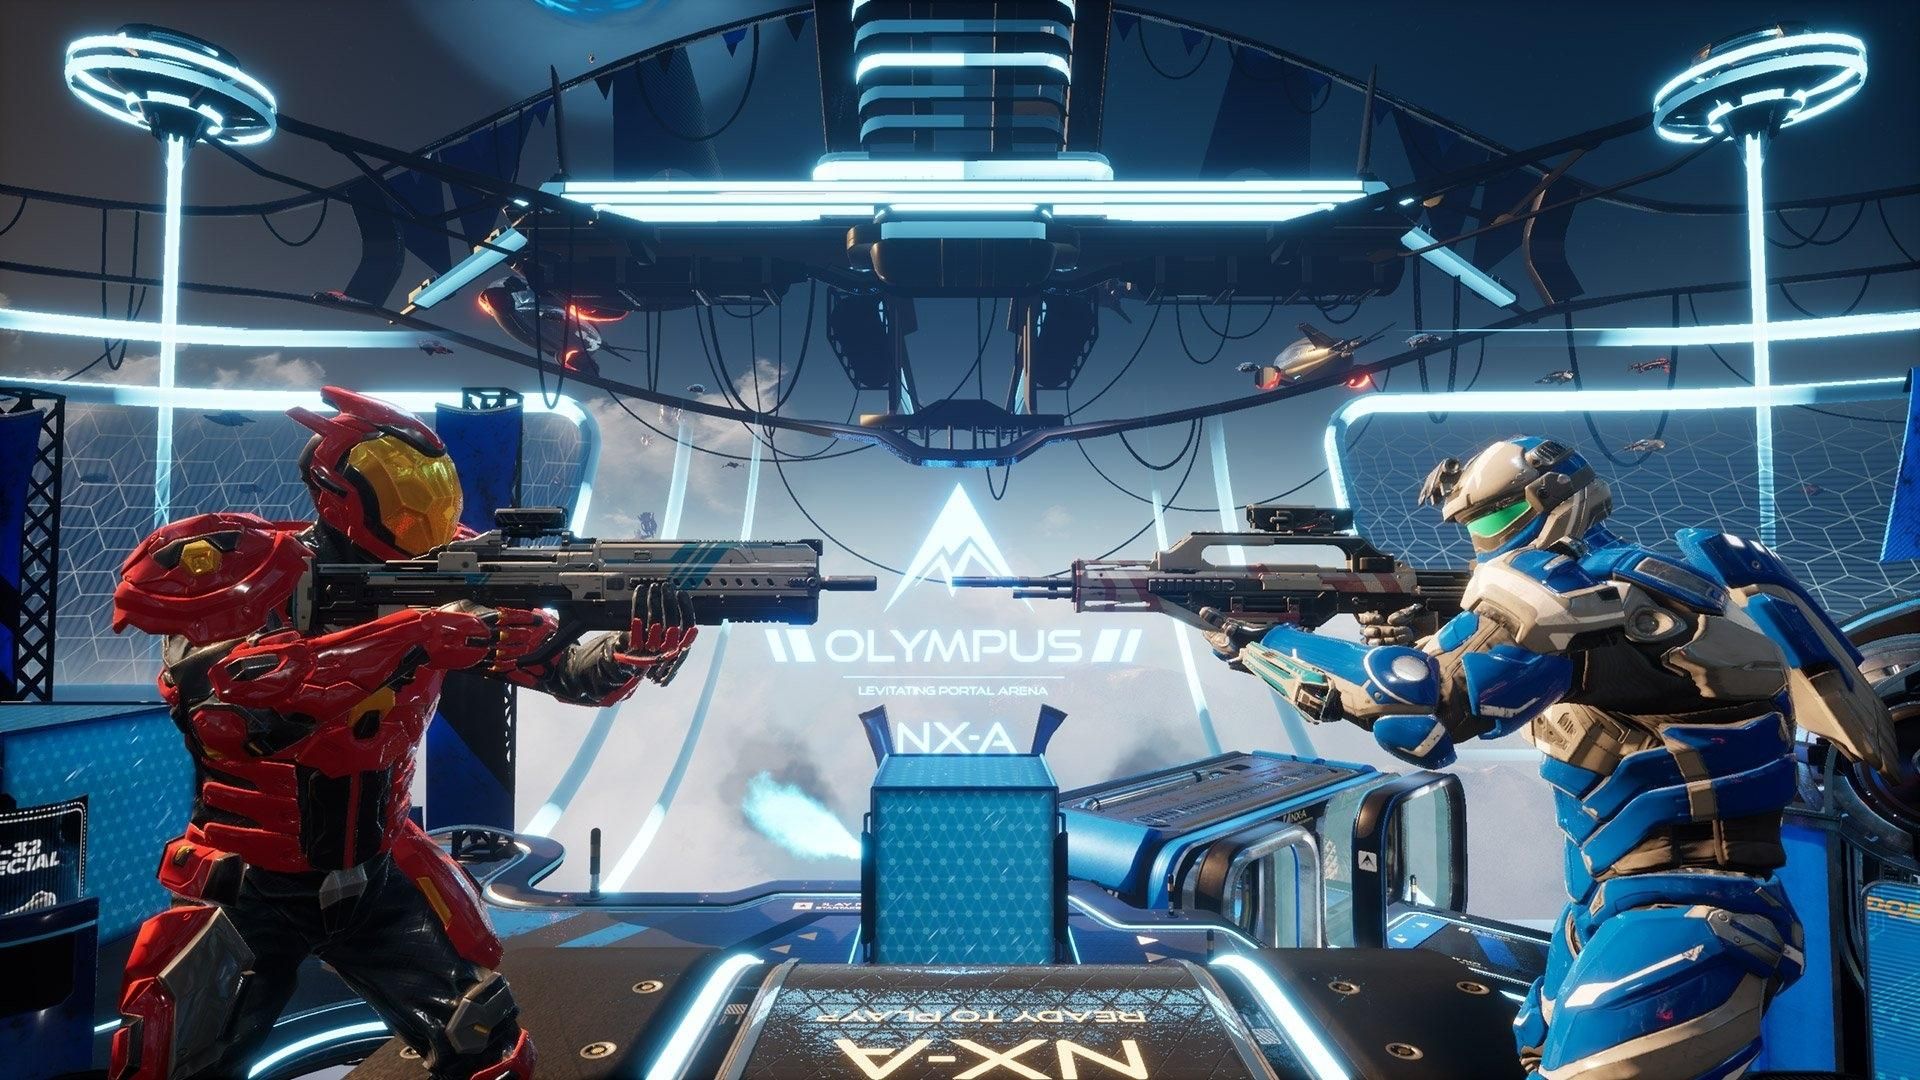 Splitgate gained players after Halo Infinite launched